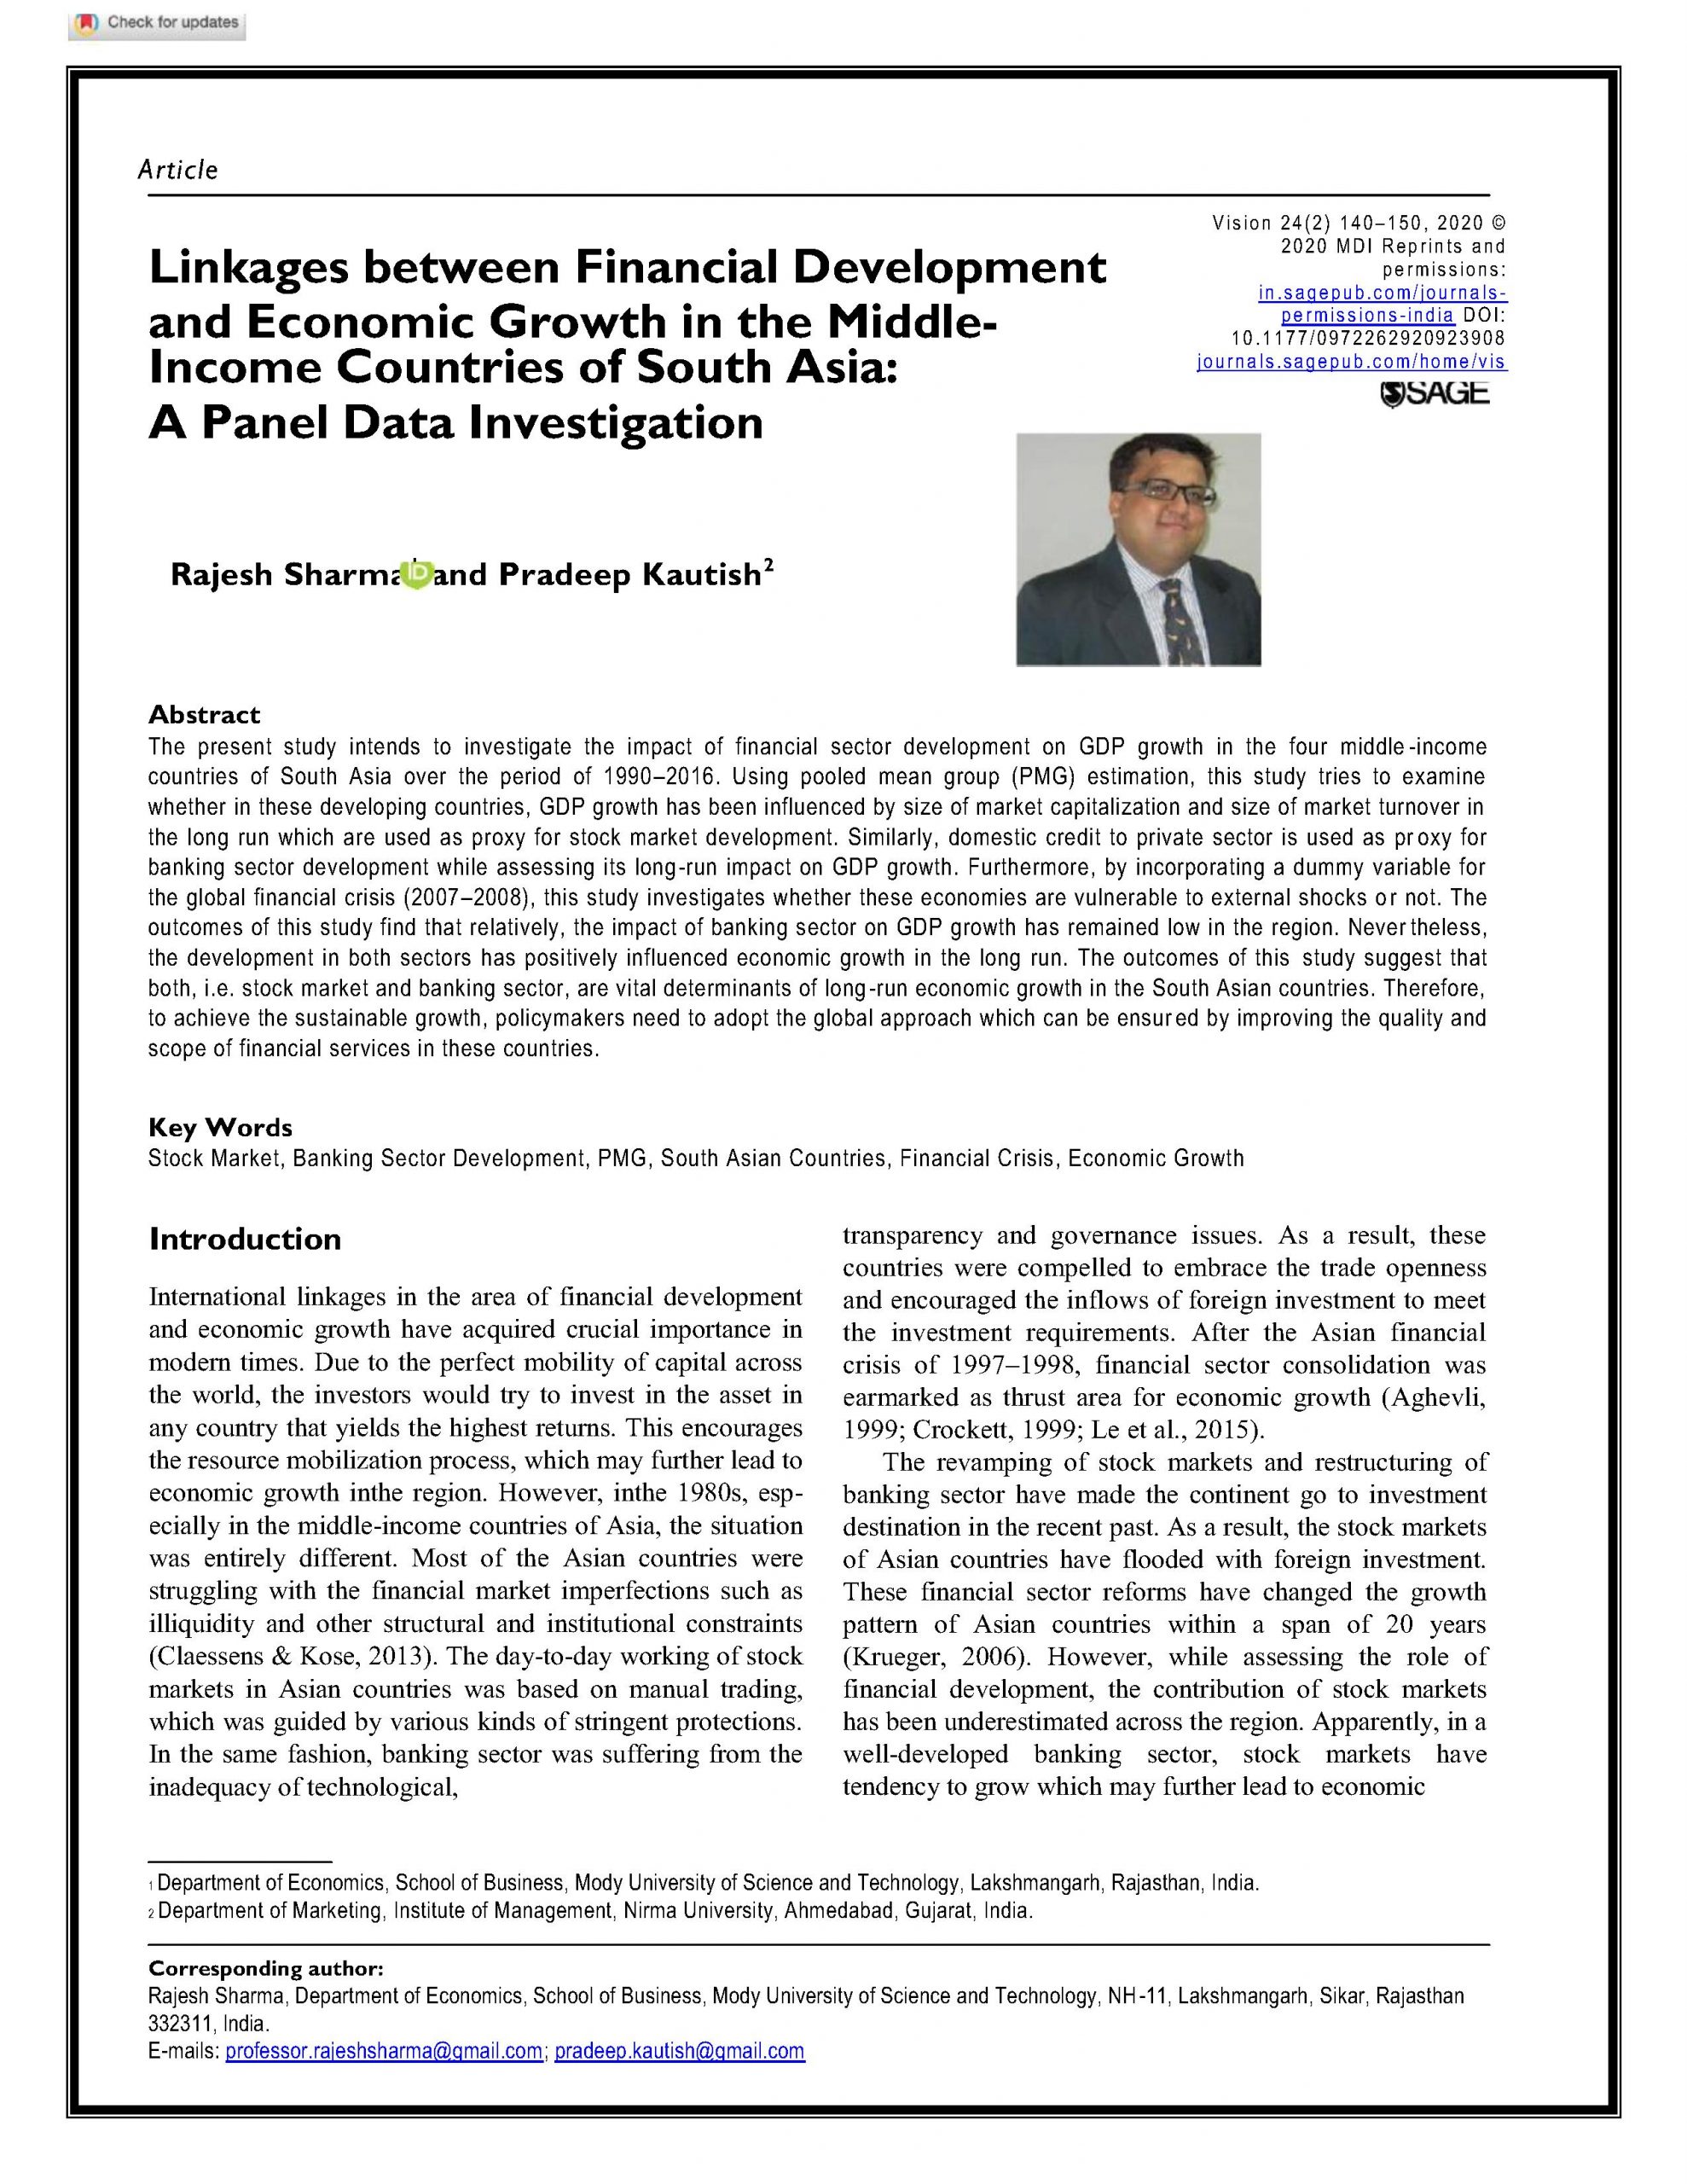 Linkages between Financial Development and Economic Growth in the Middle-Income Countries of South Asia: A Panel Data Investigation